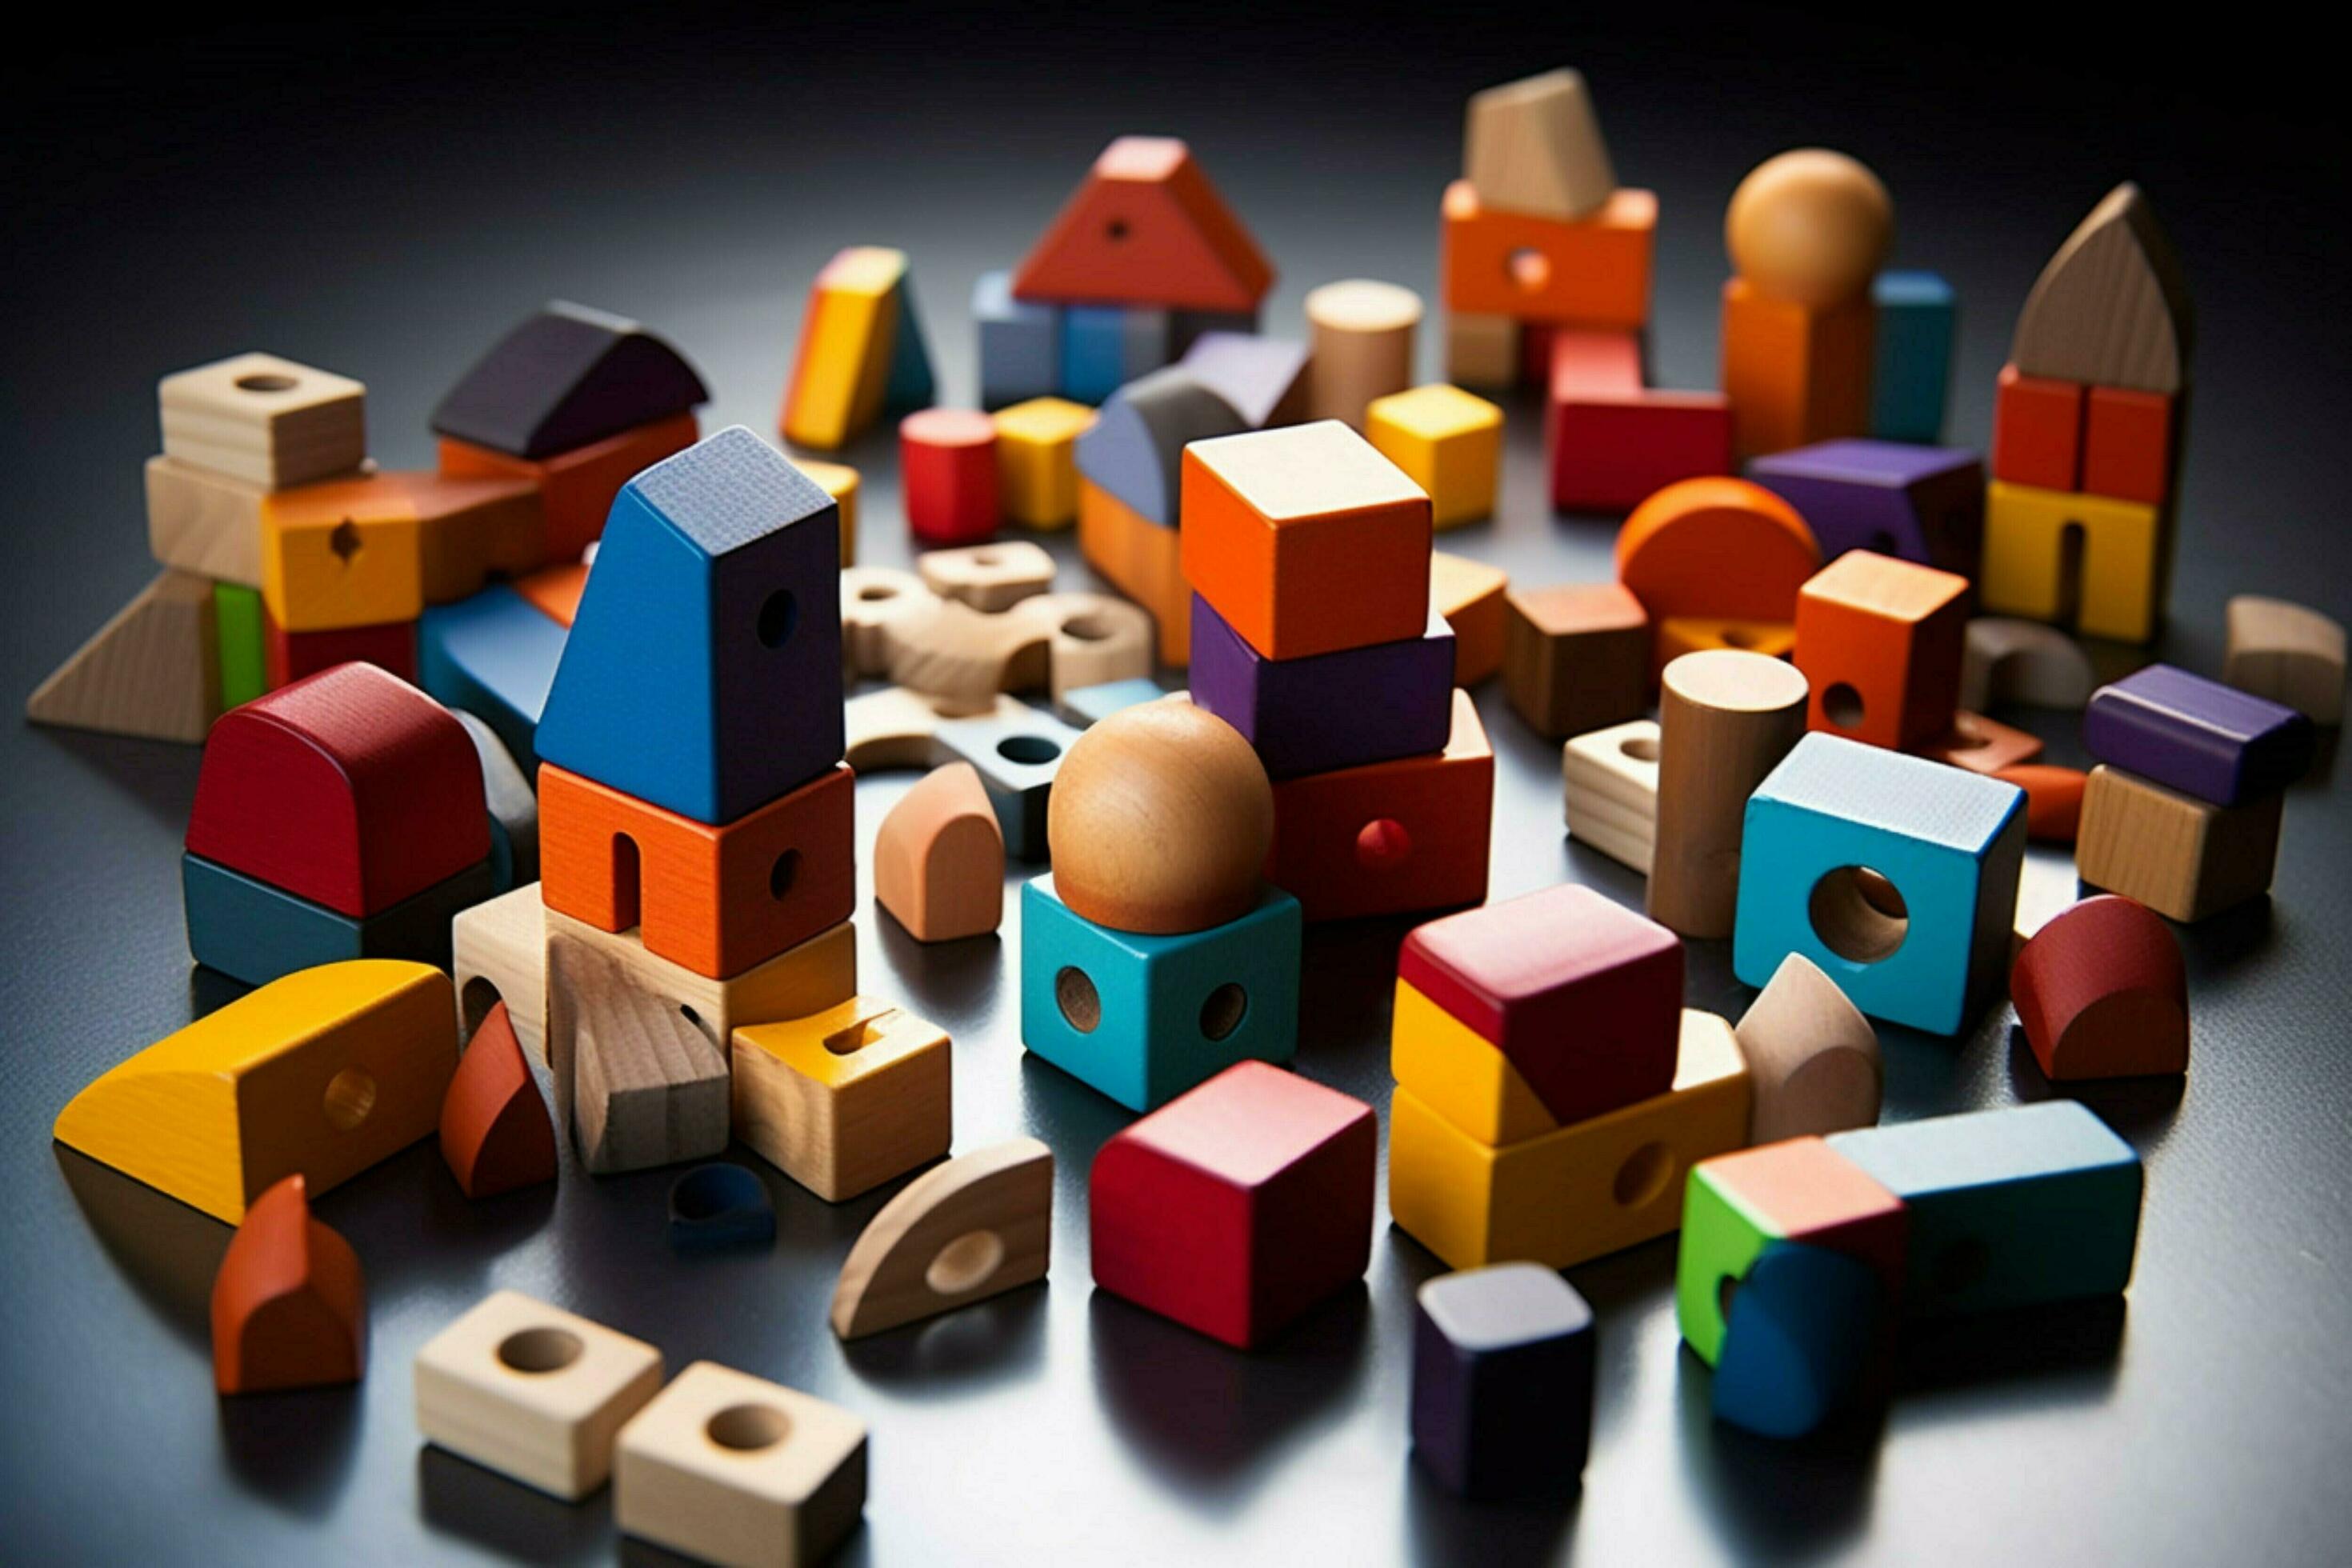 A set of magnetic shapes for building 30623535 Stock Photo at Vecteezy